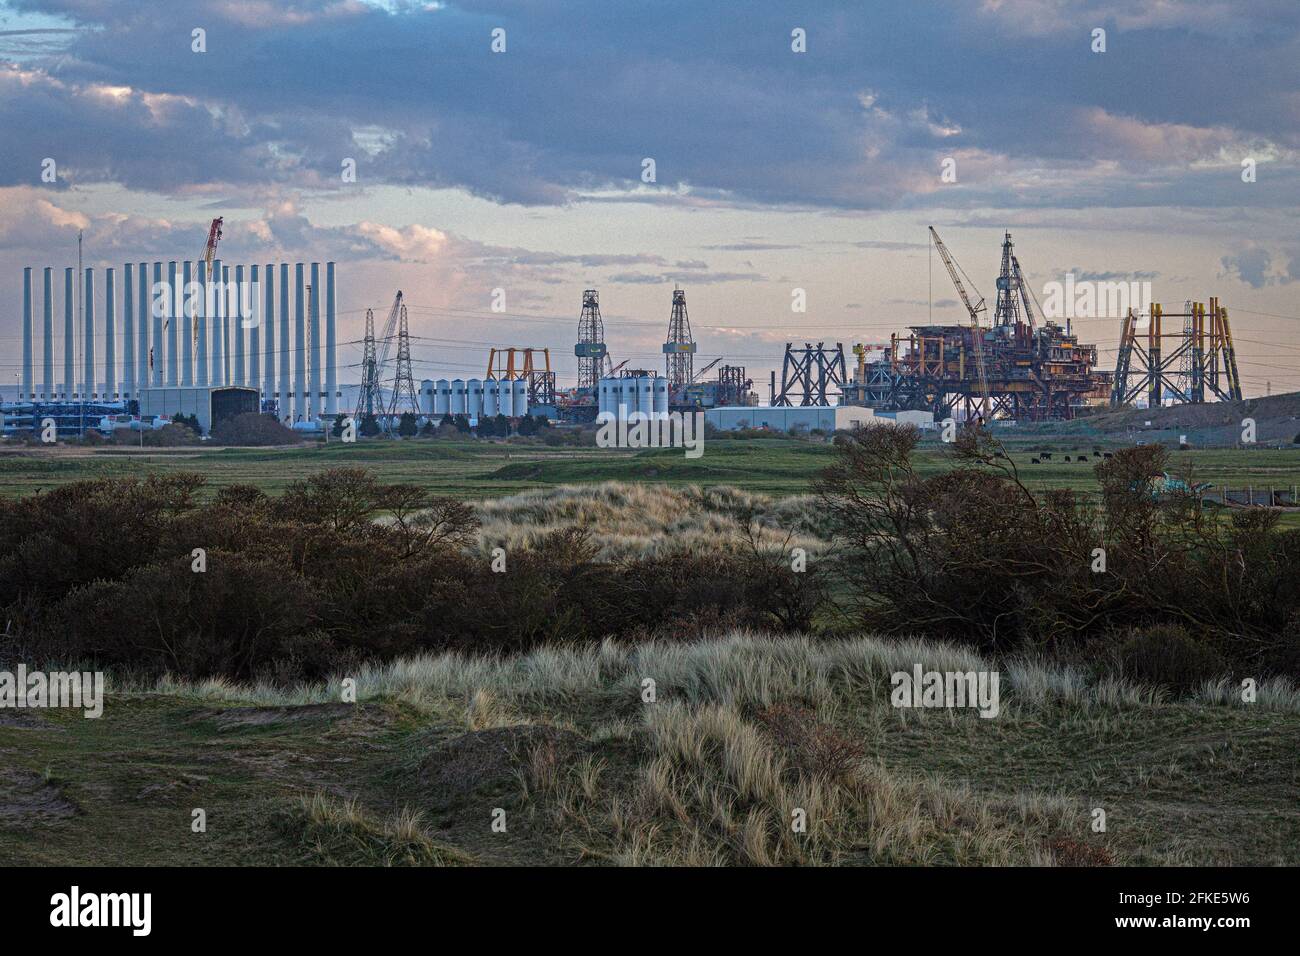 Seaton Carew Golf Club with the Top Deck of Shell Brent offshore platform being dismantled and recycled at Able UK in distance . Stock Photo